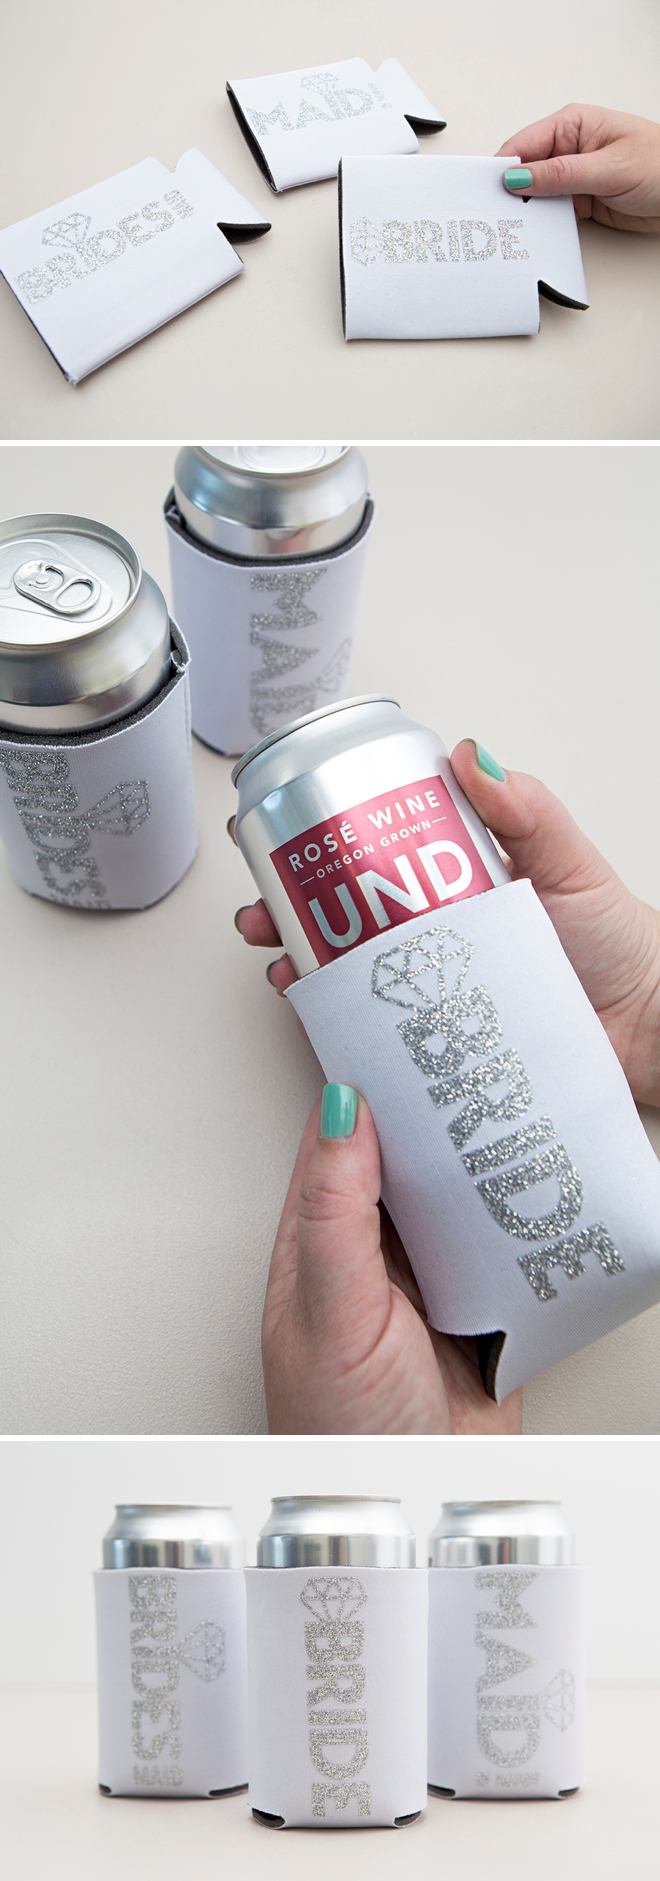 How cute are these DIY bridal party can koozies!?